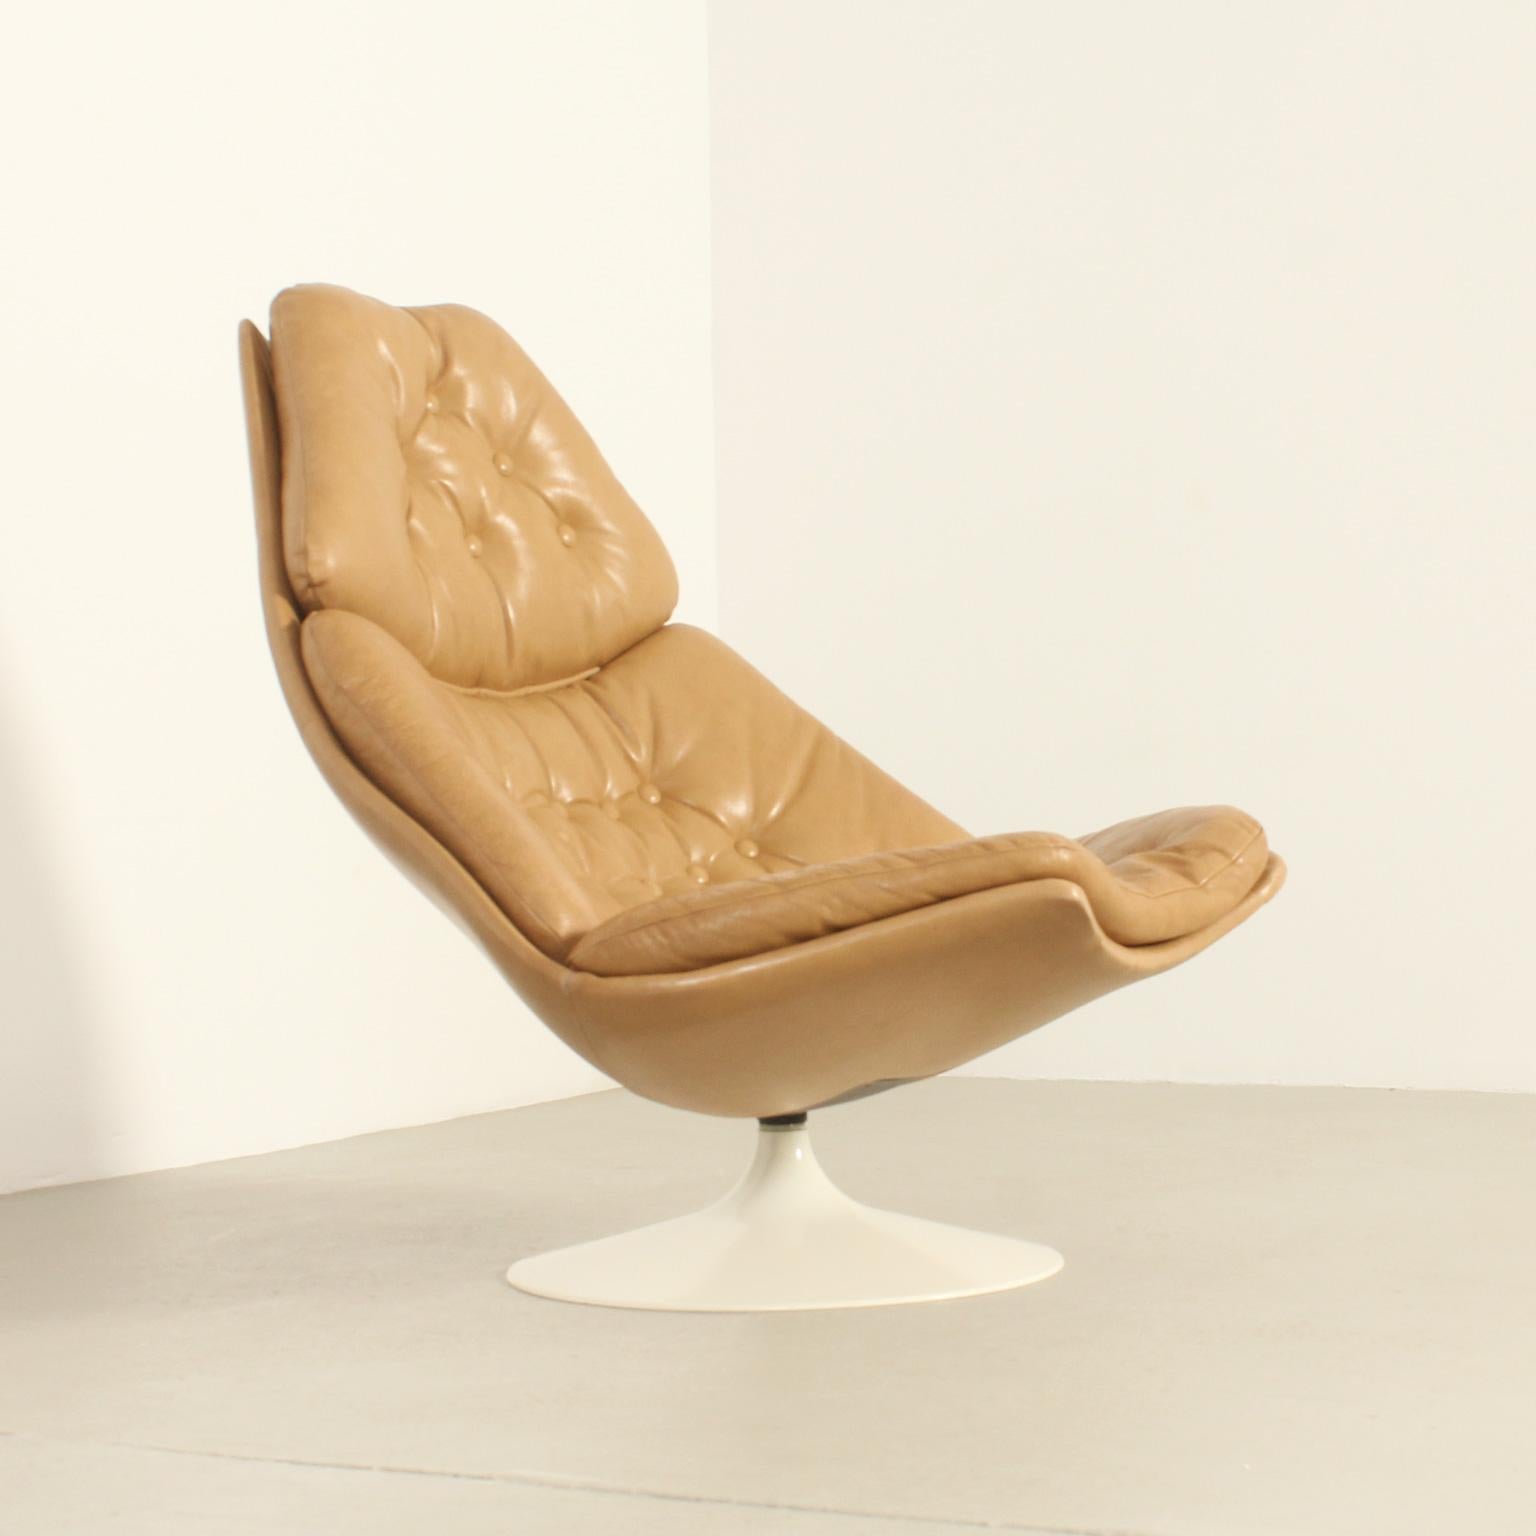 Lounge chair model FS588 designed in 1967 by British designer Geoffrey Harcourt for Artifort, Netherlands. Early edition in classic tan leather and fiberglass swivel base. A very comfortable classic design.